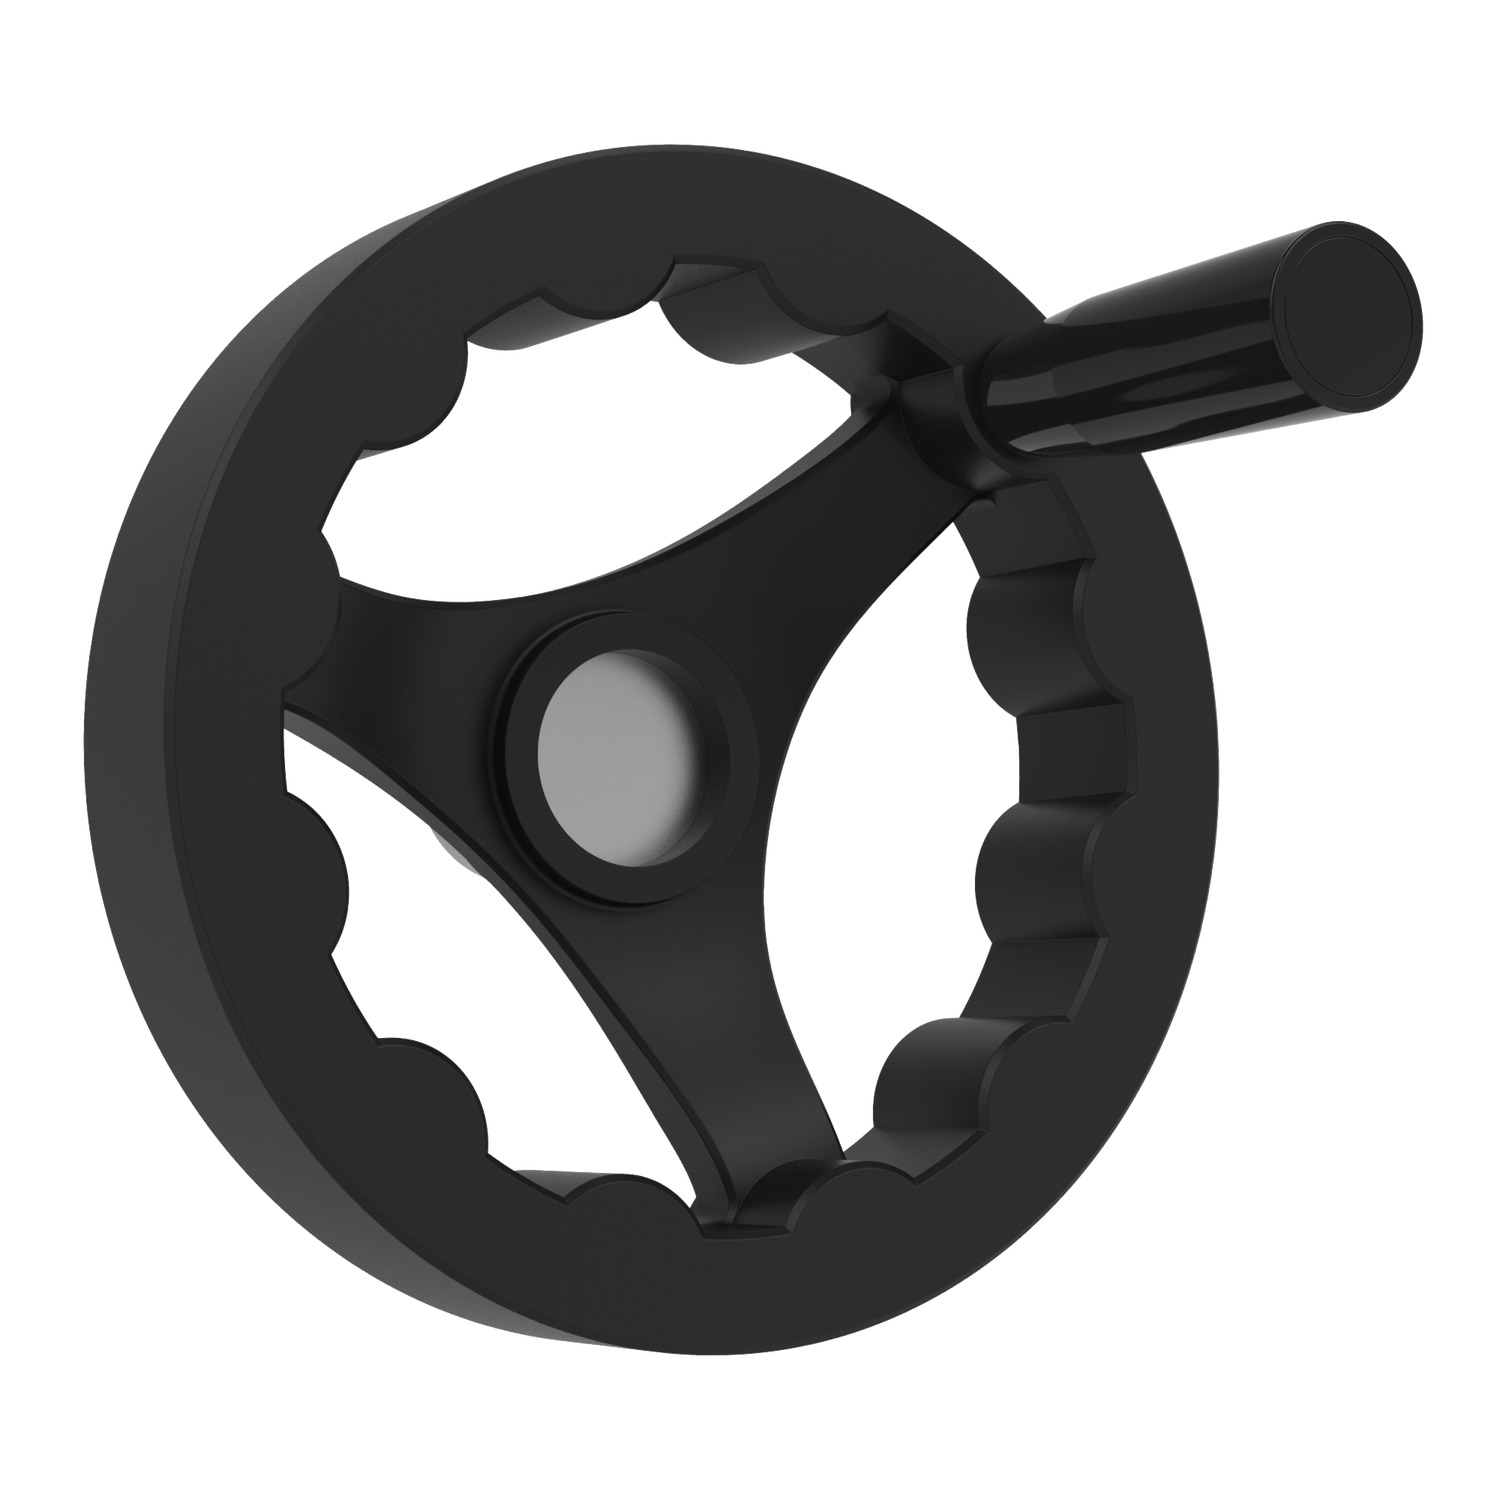 Three Spoked Handwheels Thermoplastic three spoke handwheel with rotating grip handle. Pilot hole allows for various sizes of keyway to be machined into the hub.